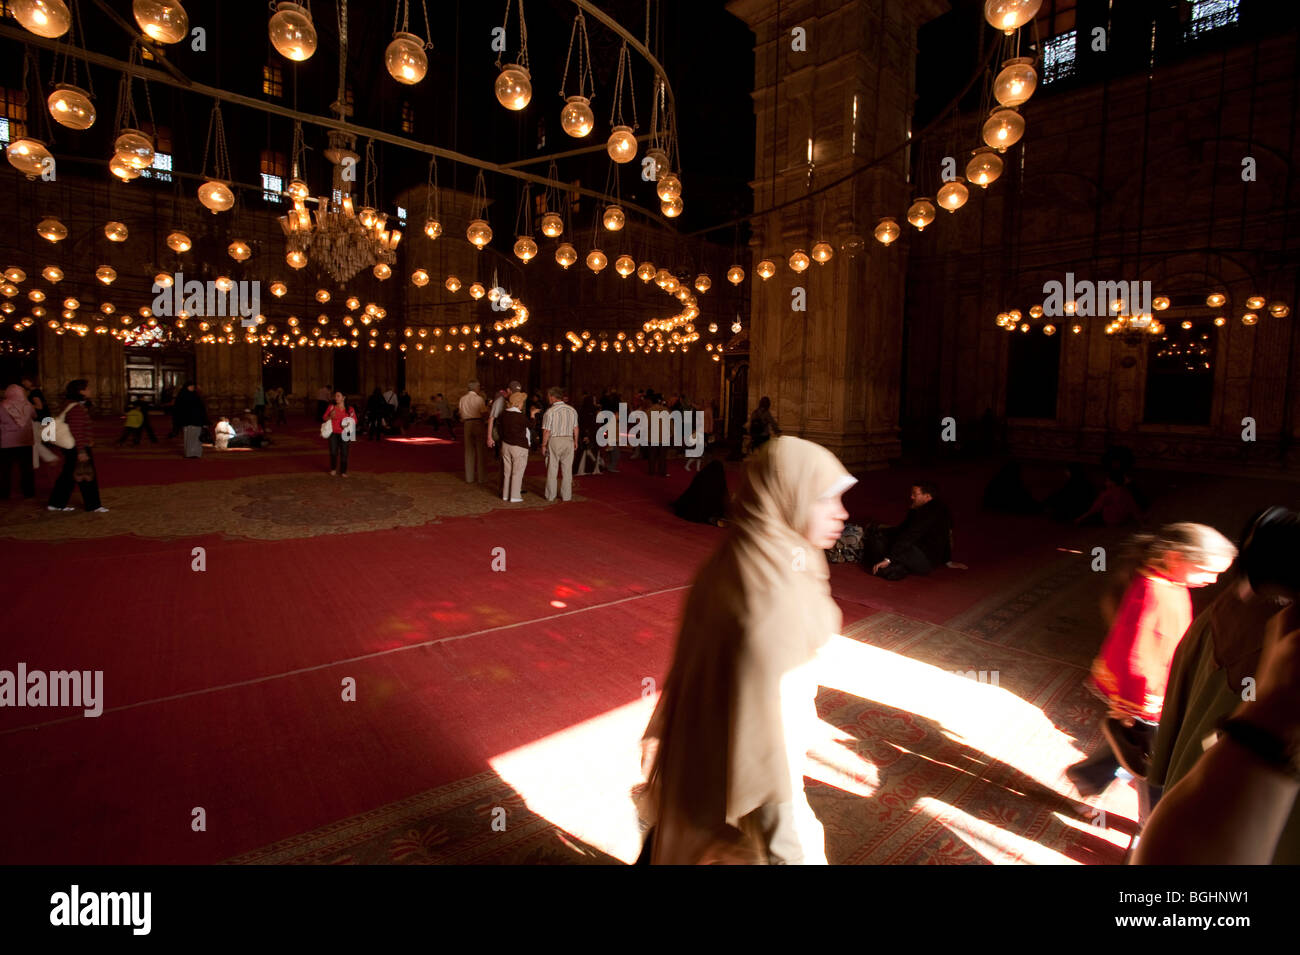 The Mosque of Mohamed Ali in the Saladin Citadel of Cairo, Egypt, Africa Stock Photo